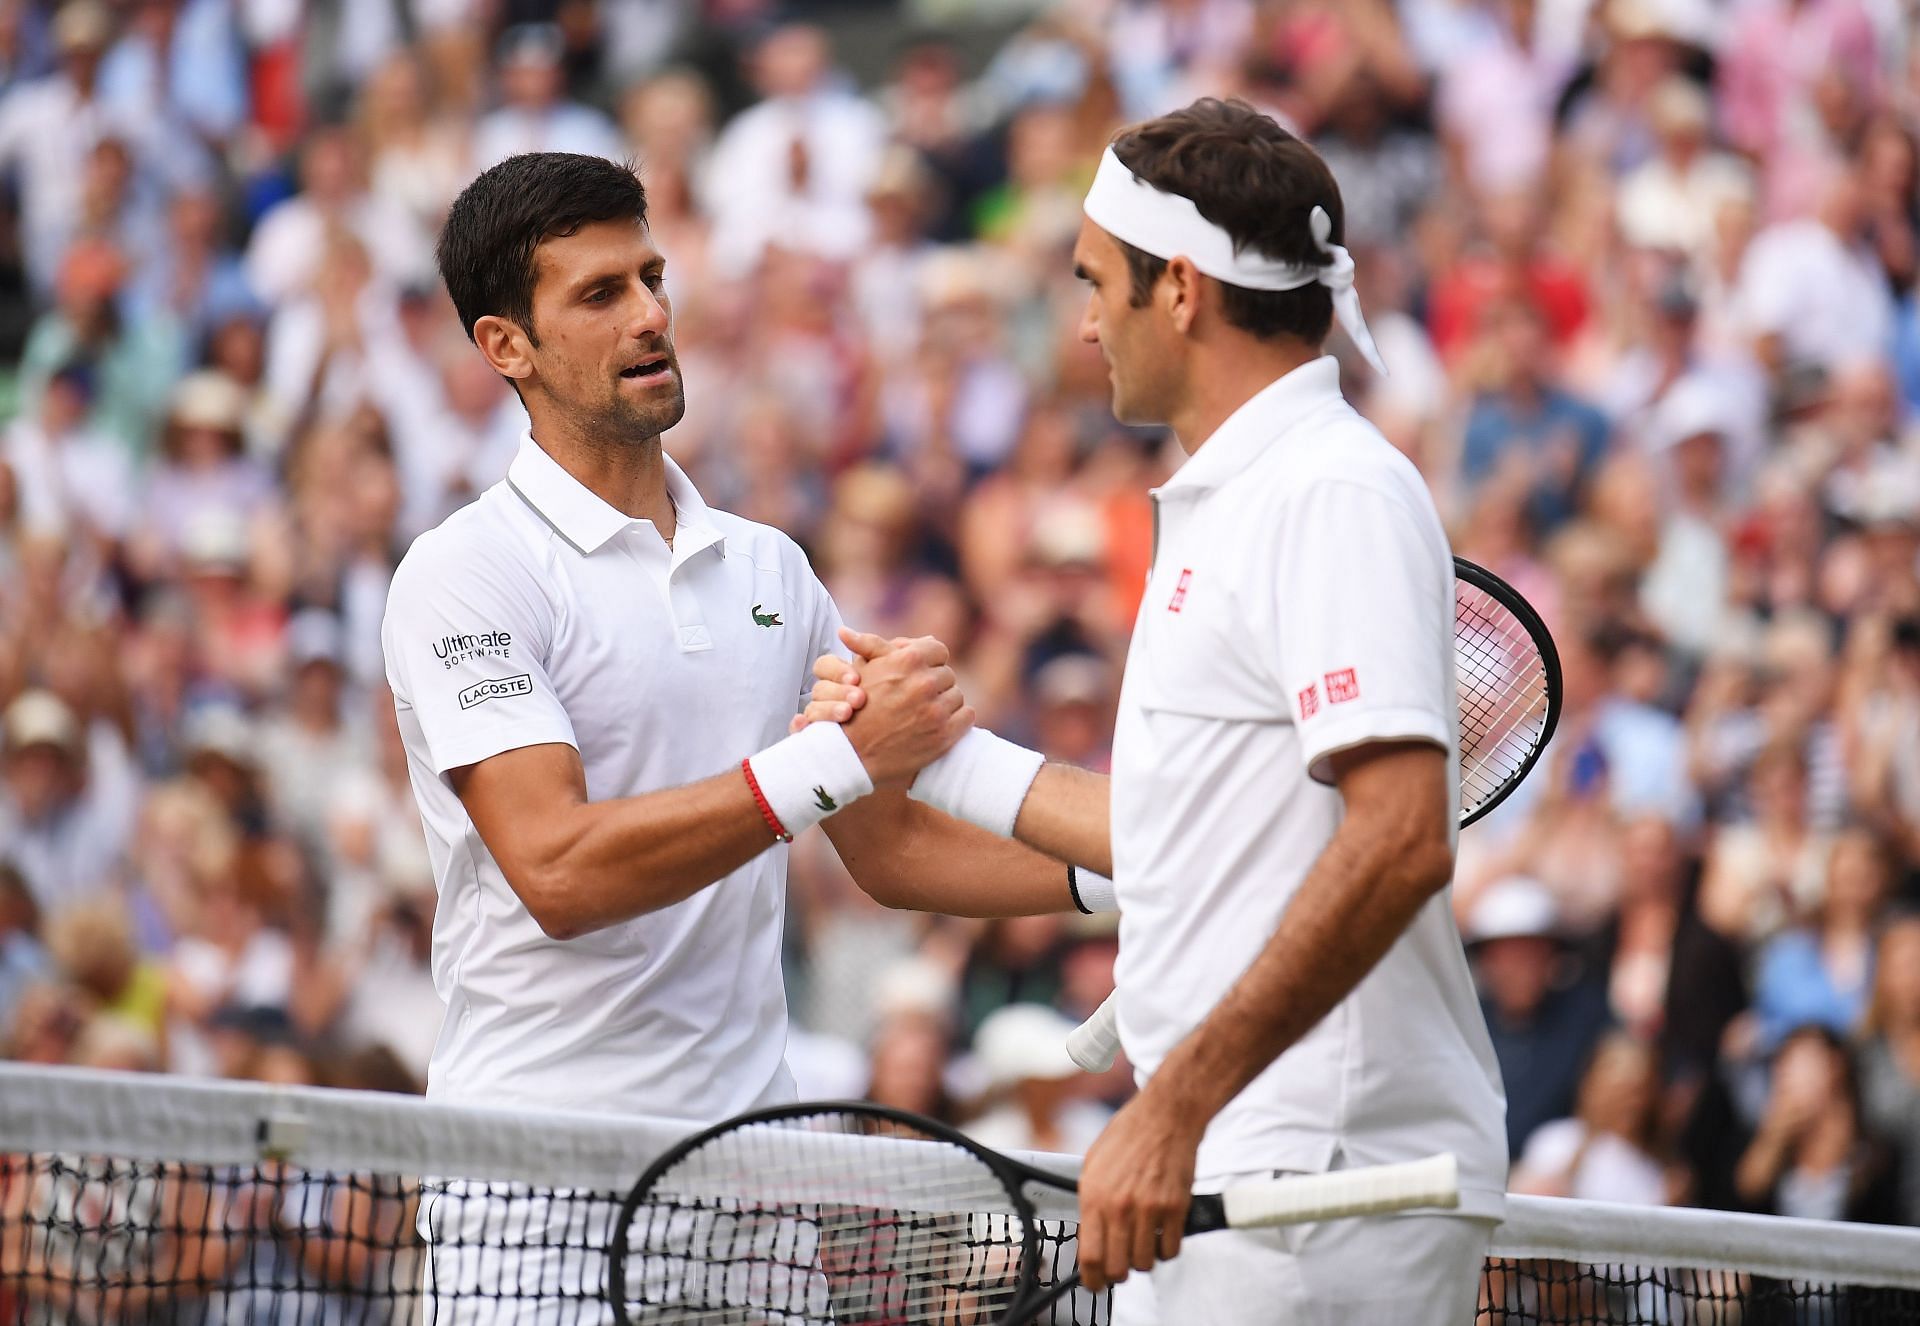 Roger Federer was one point away from his 21st Major title but Novak Djokovic ruined his party in the 2019 Wimbledon final.